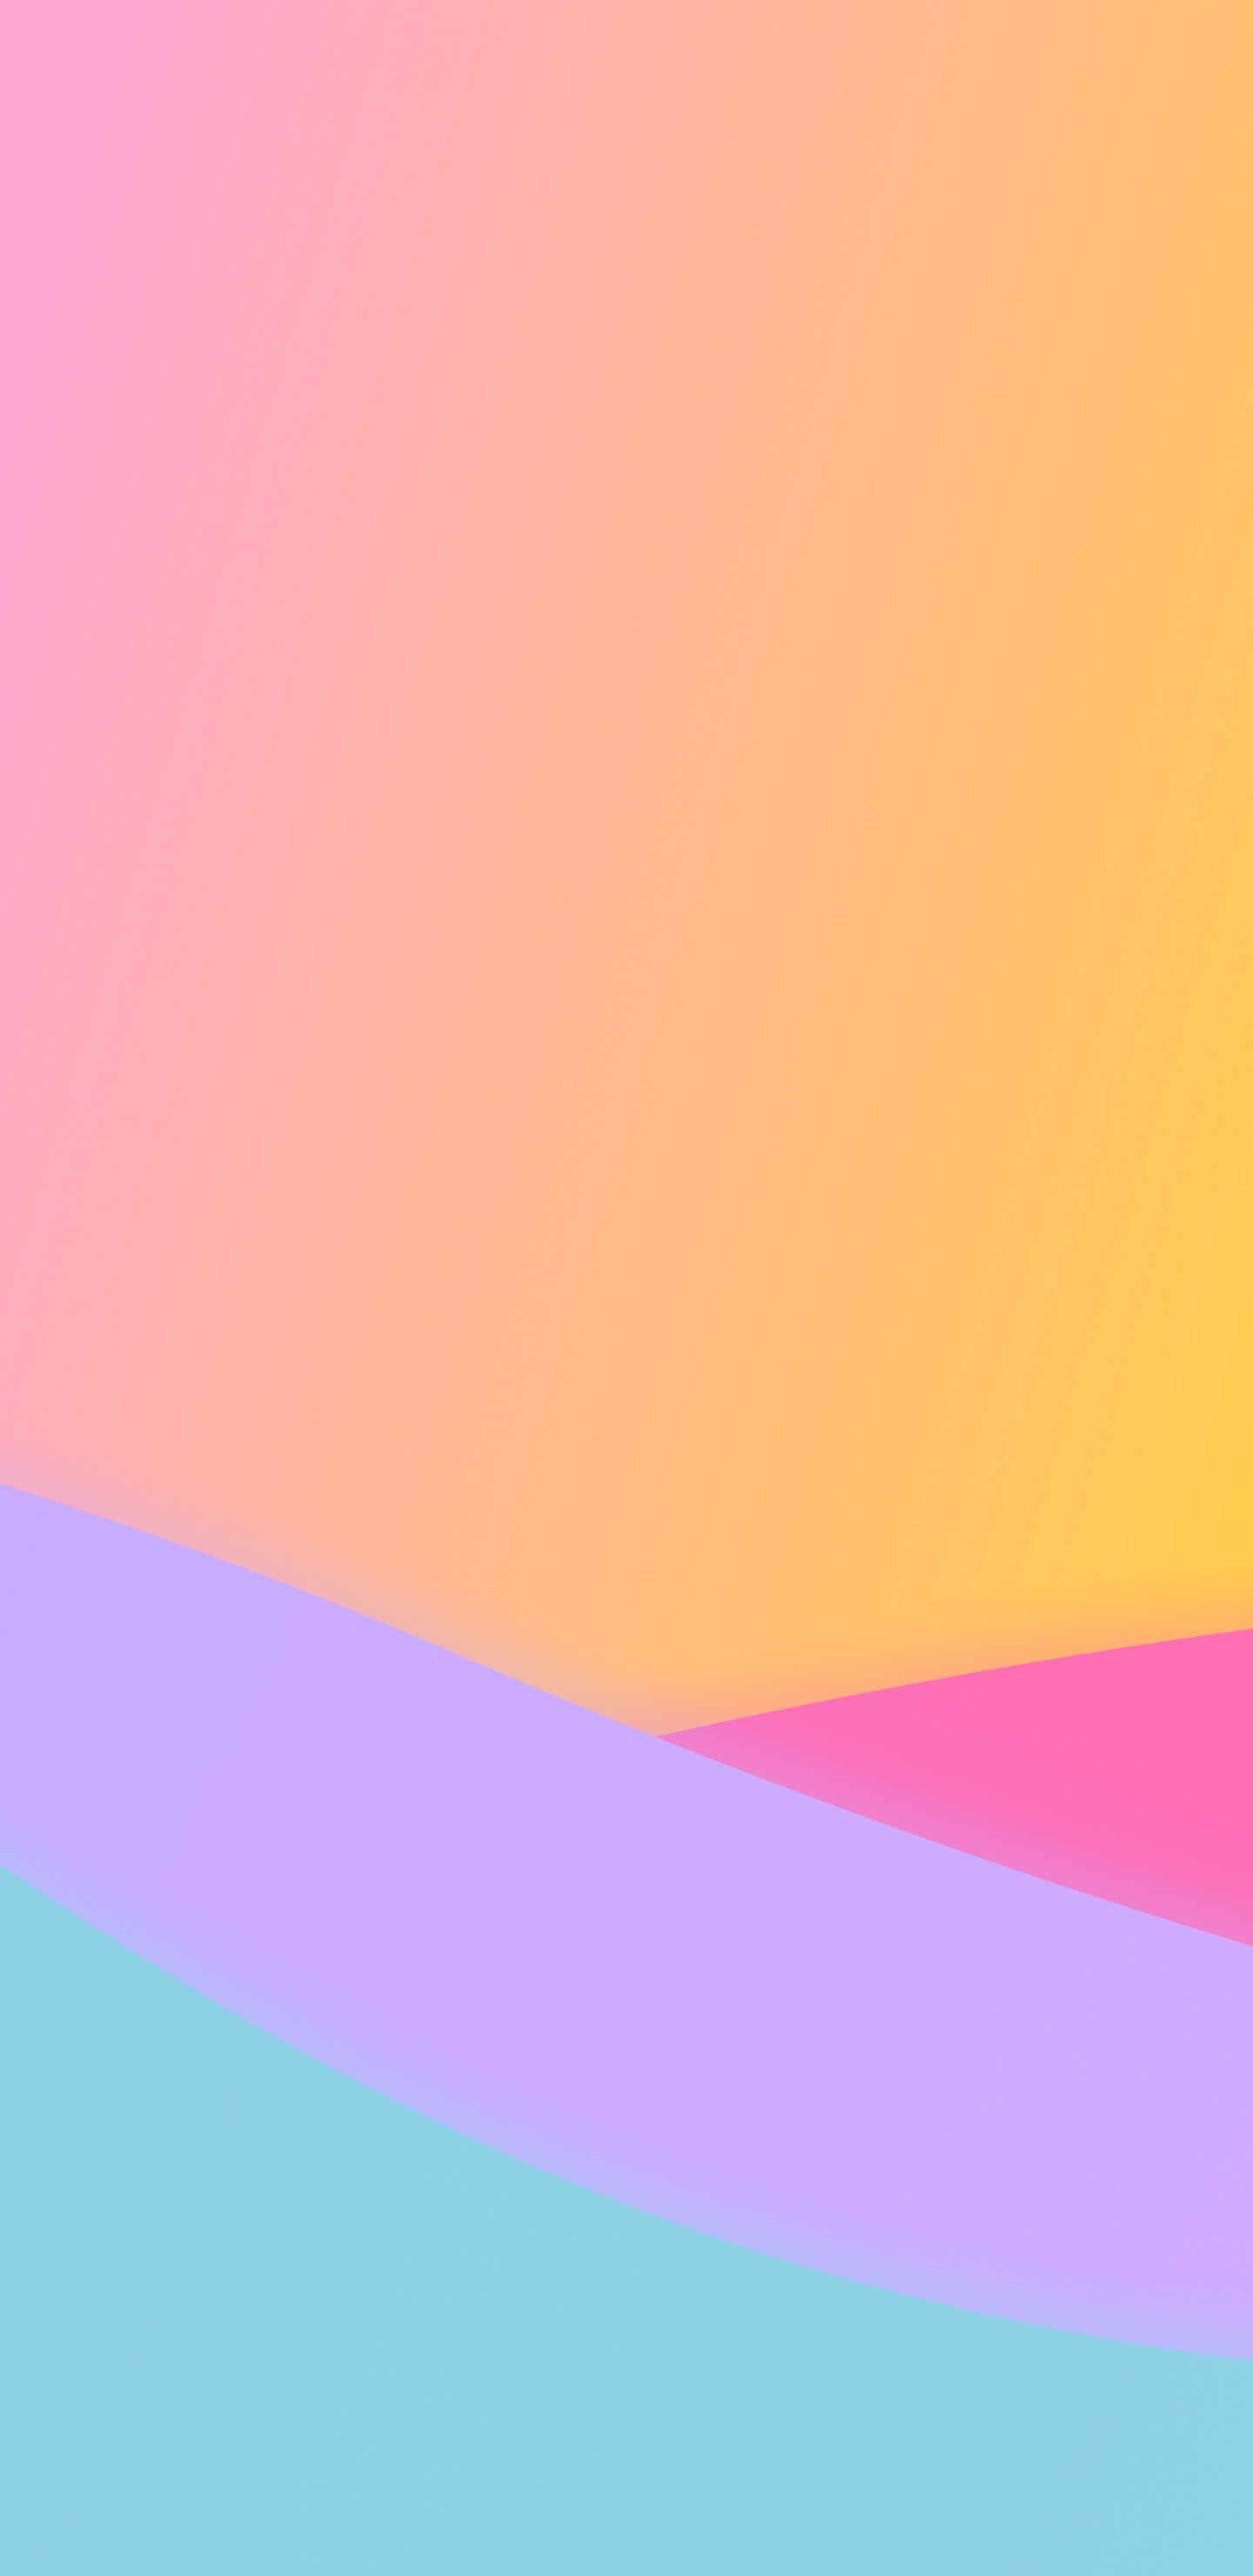 Apples, IOS 14, Ios, Colorfulness, Violet. Wallpaper in 1440x2960 Resolution